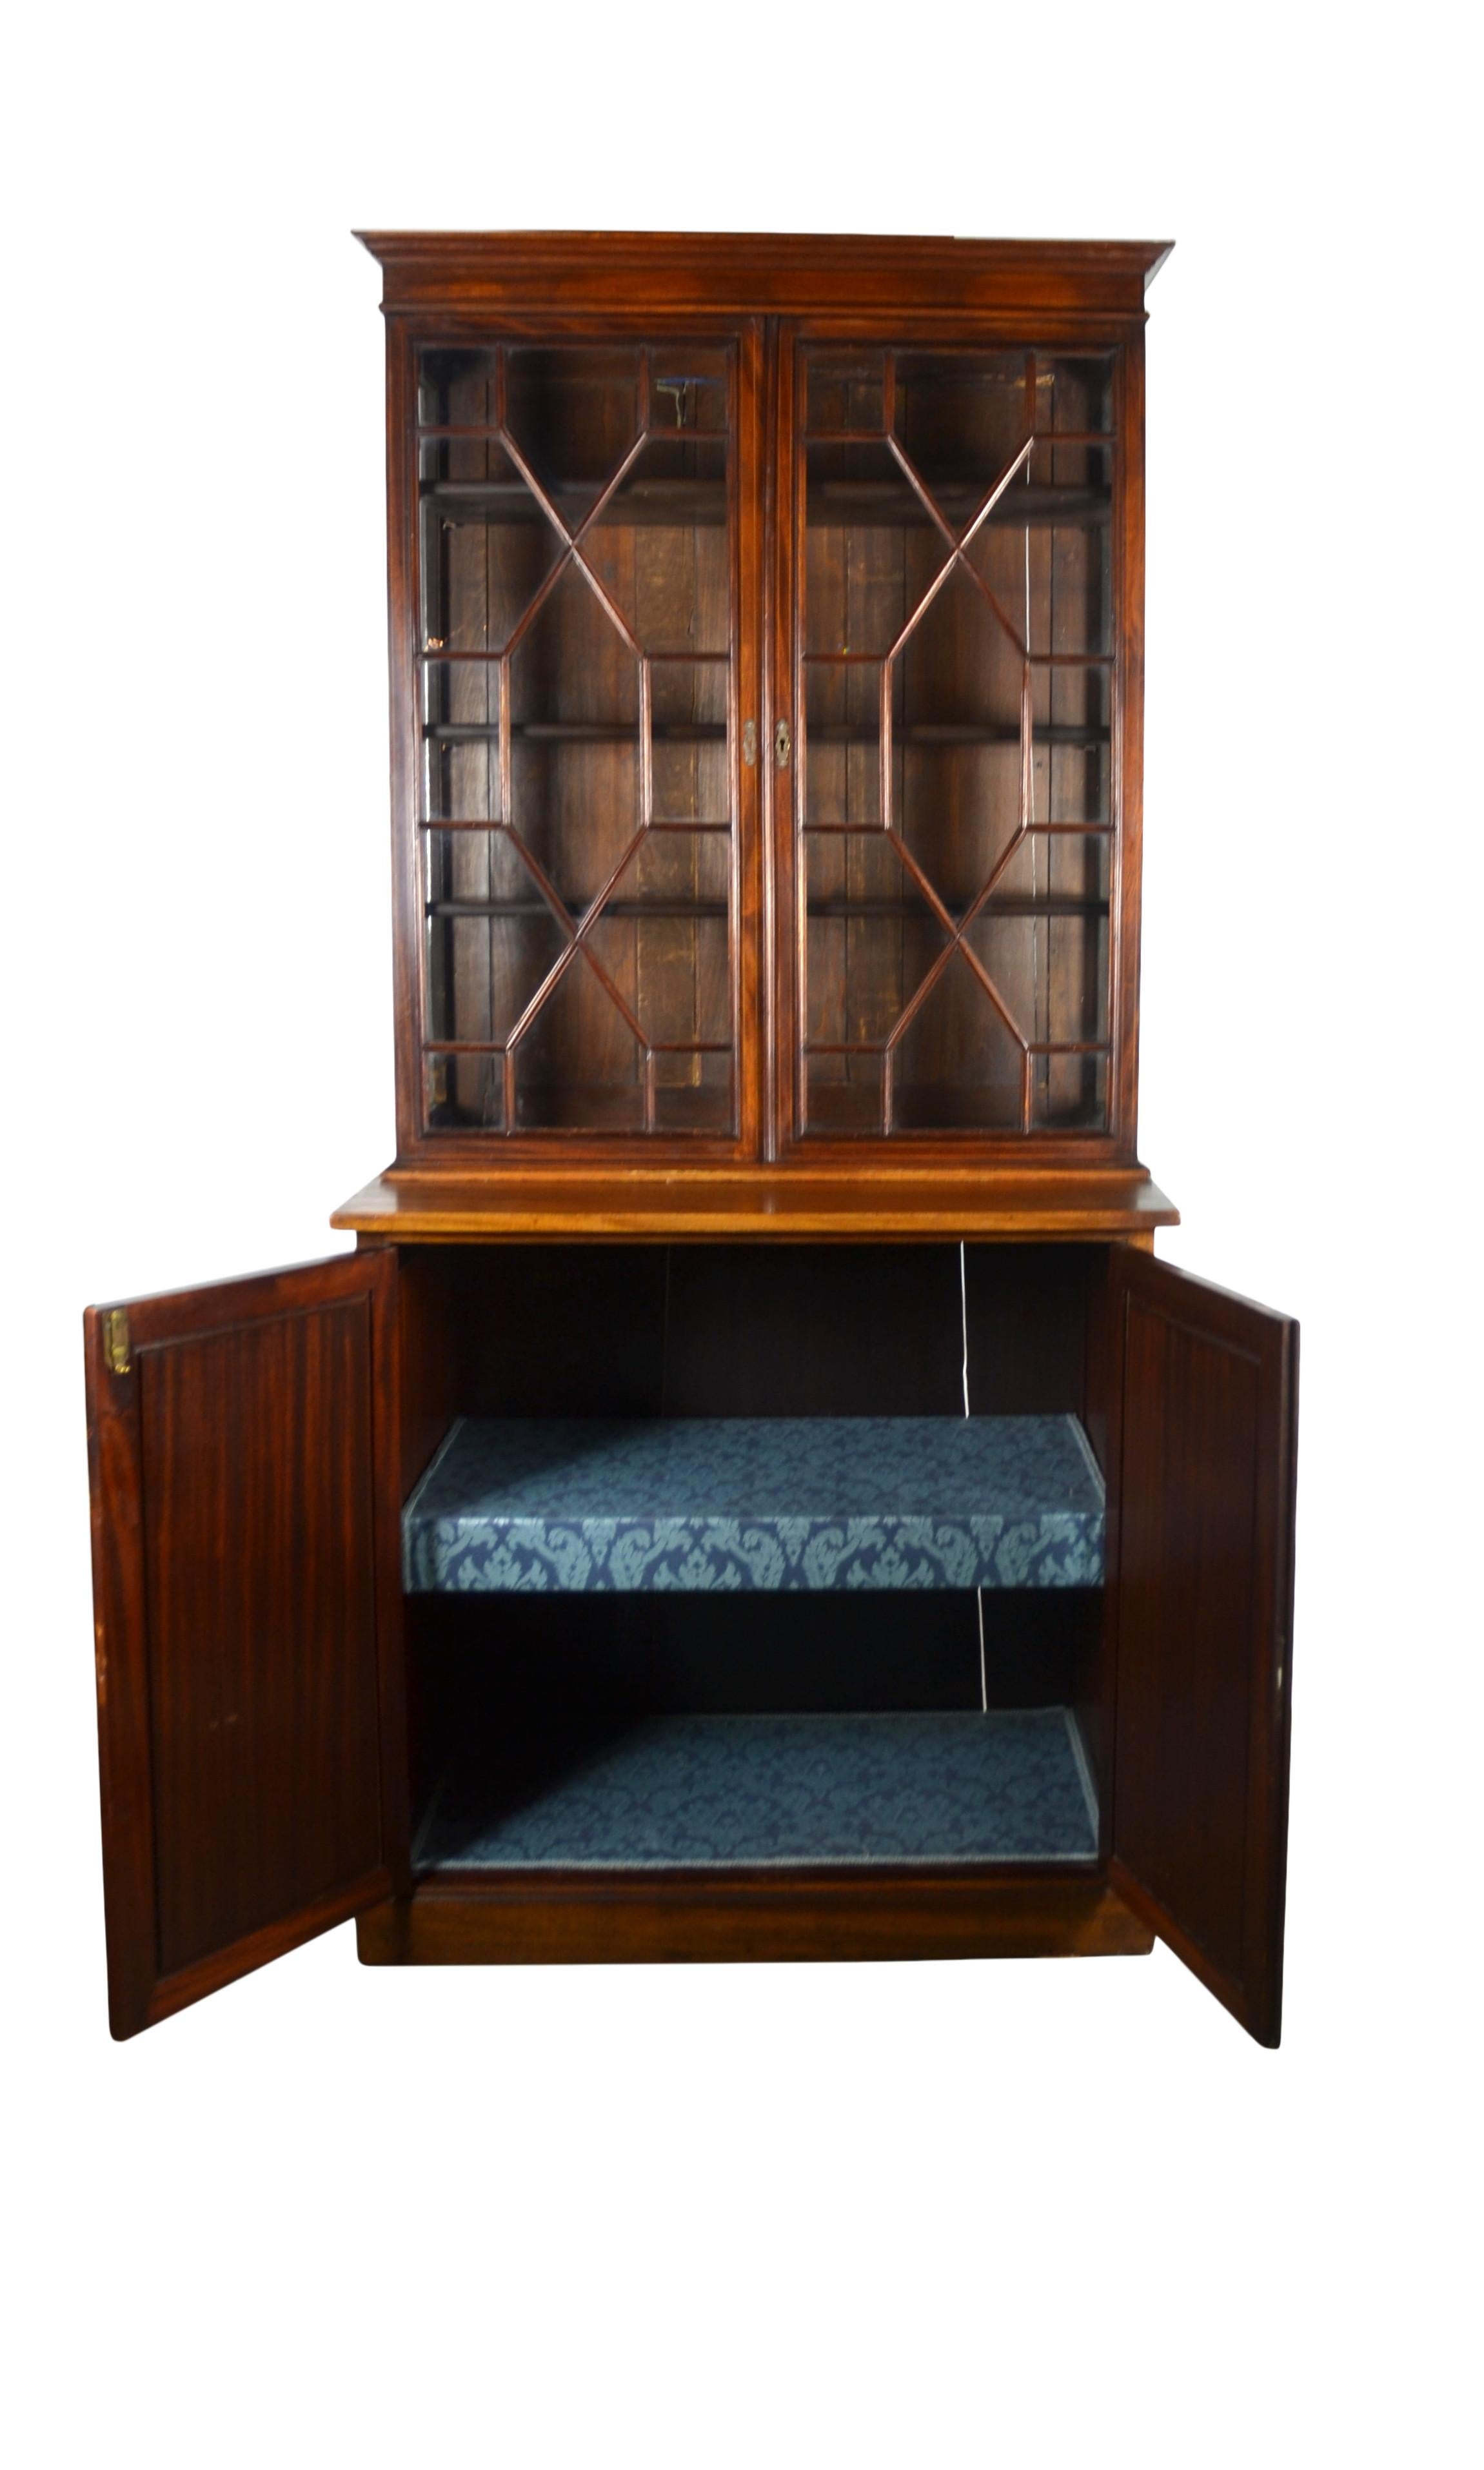 Late 19th-century mahogany two-part bookcase. Astragal glazing and string inlay to bookcase top.